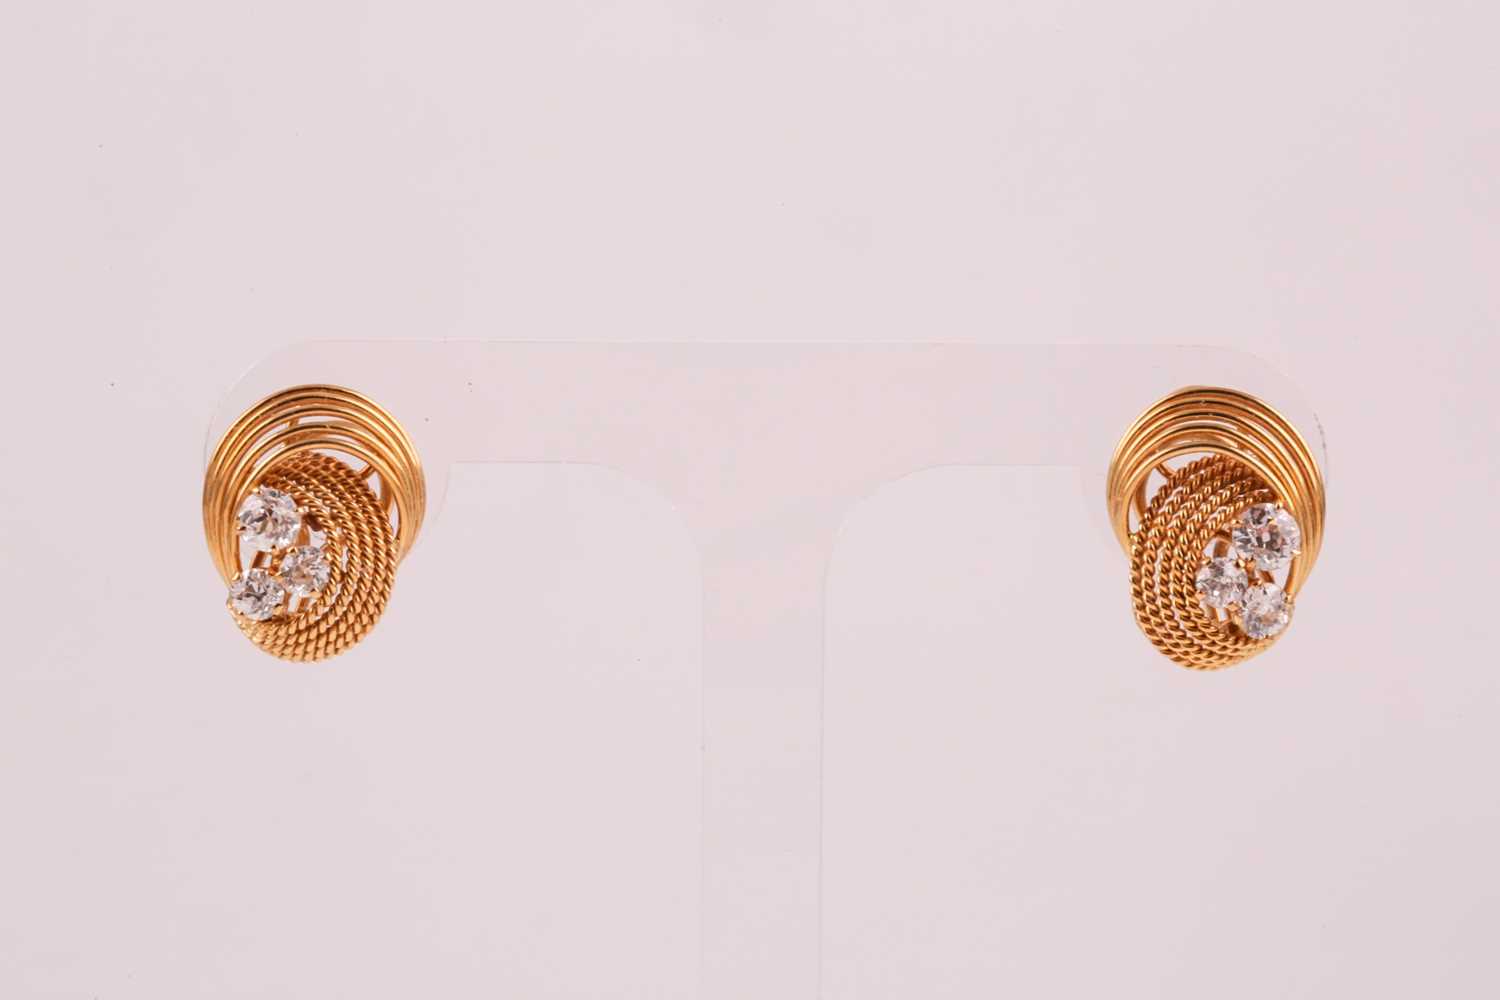 A pair of 18ct yellow gold and diamond earrings, each with a swirled rope-twist mount set with three